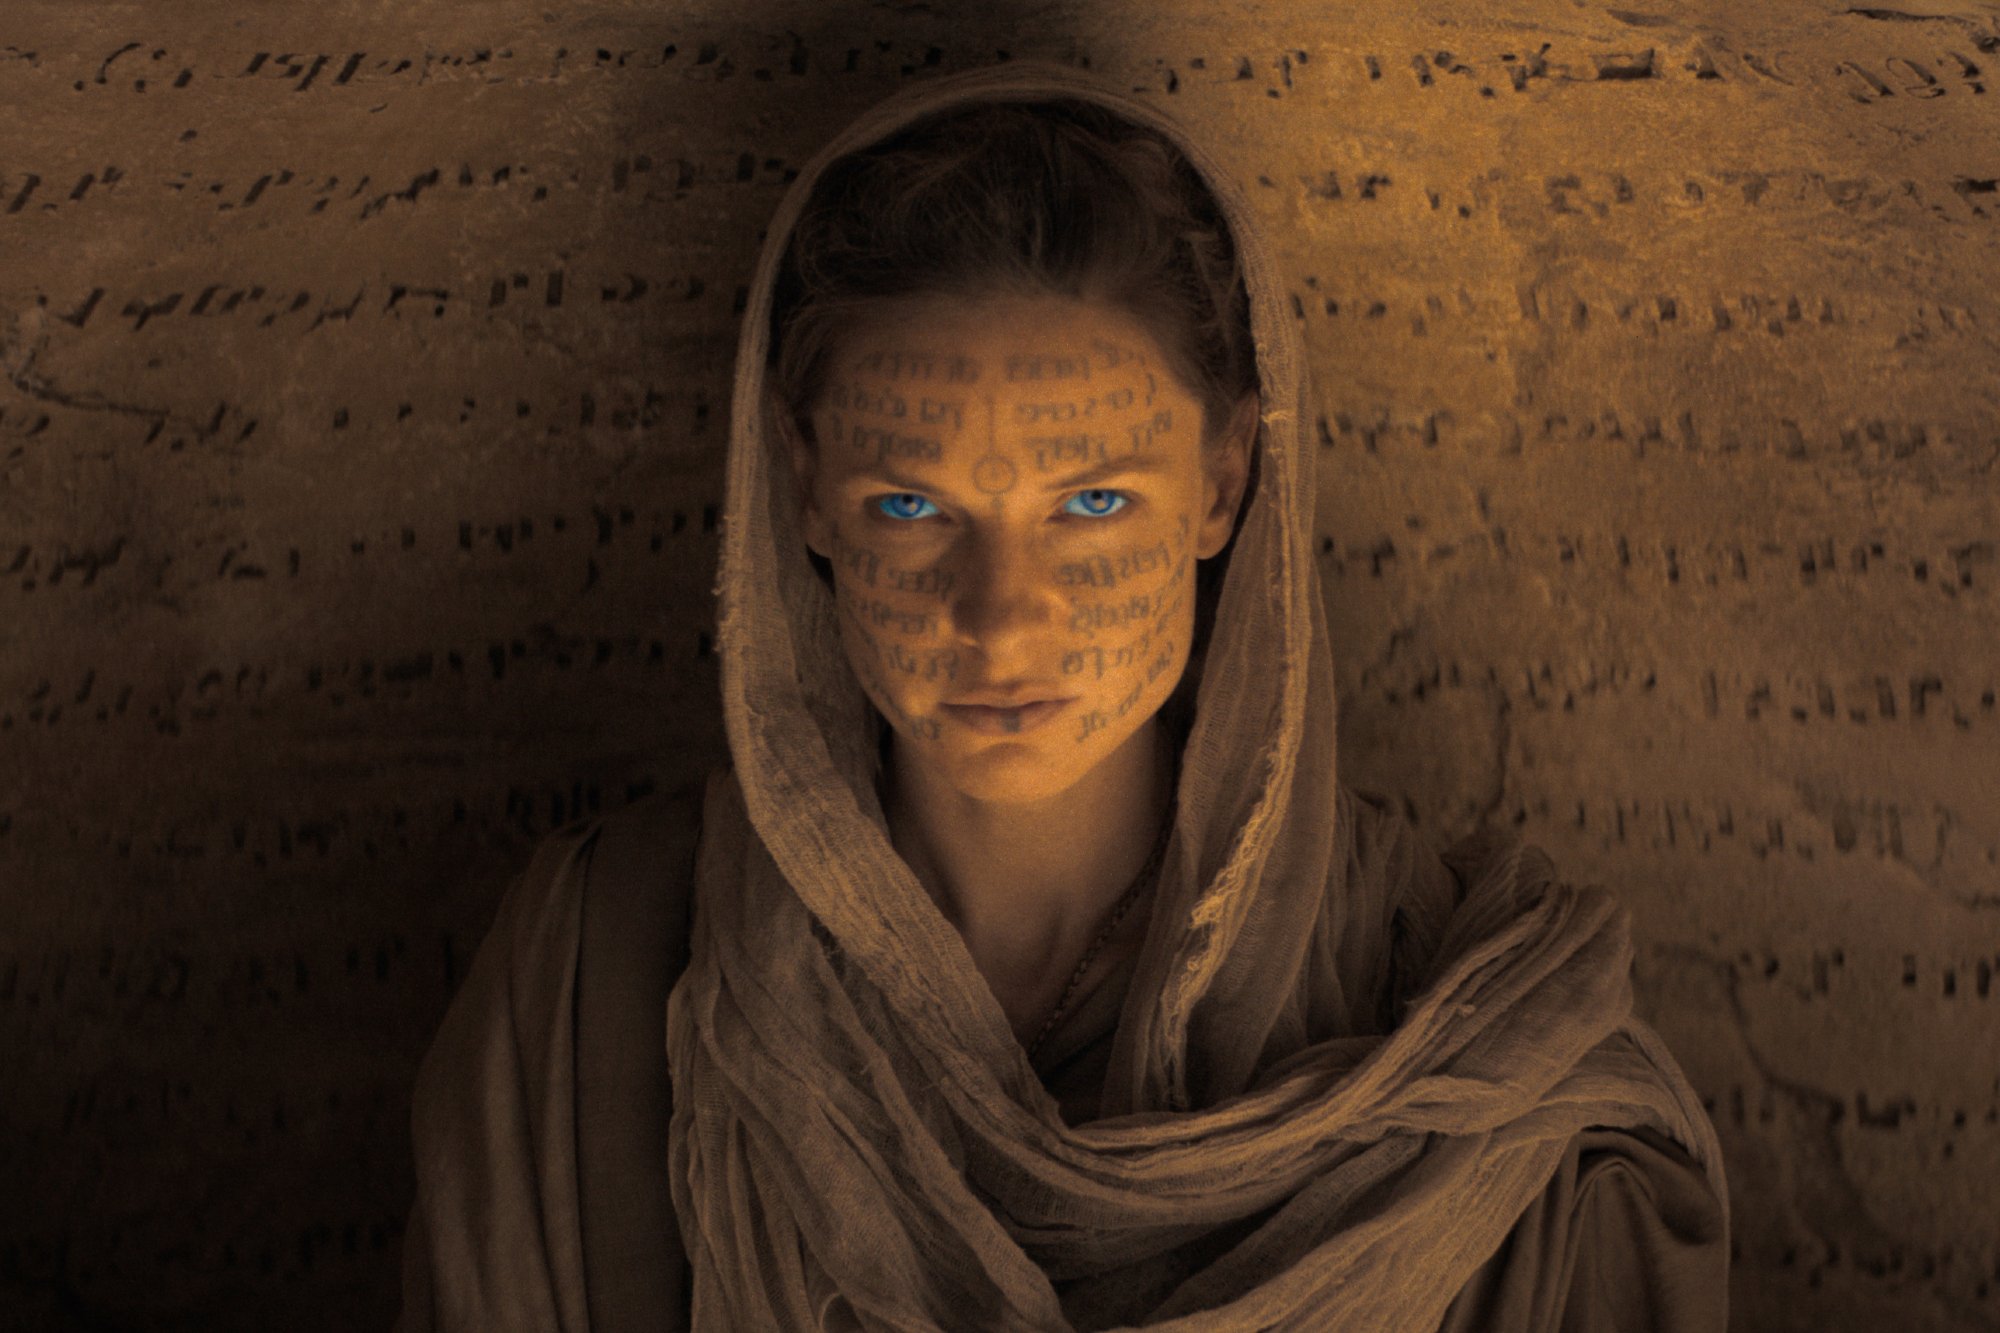 'Dune' actor Rebecca Ferguson as Lady Jessica with symbols on her skin and wearing a hood